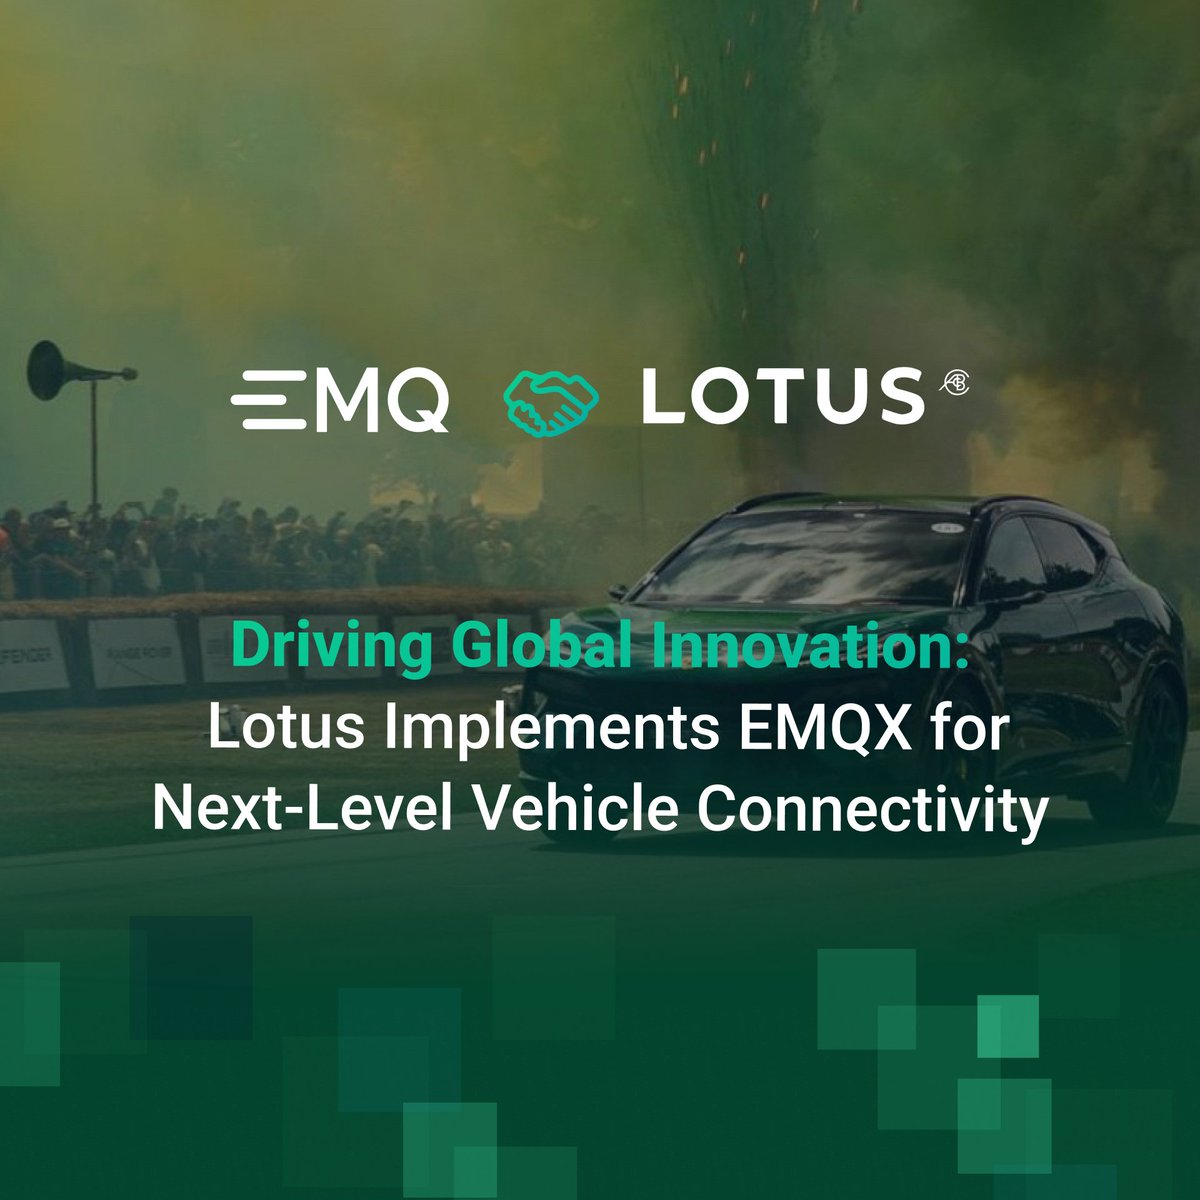 🌟 Excited for our collab with @lotuscars! 🚗 Merging #EMQXPlatform & Lotus's Intelligent Connected Service Platform heralds a new era in #smartmobility.

Read more 👉 bit.ly/3QJ8HPw

#ConnectedVehicles #IoT #IoV #automotive #TechInnovation